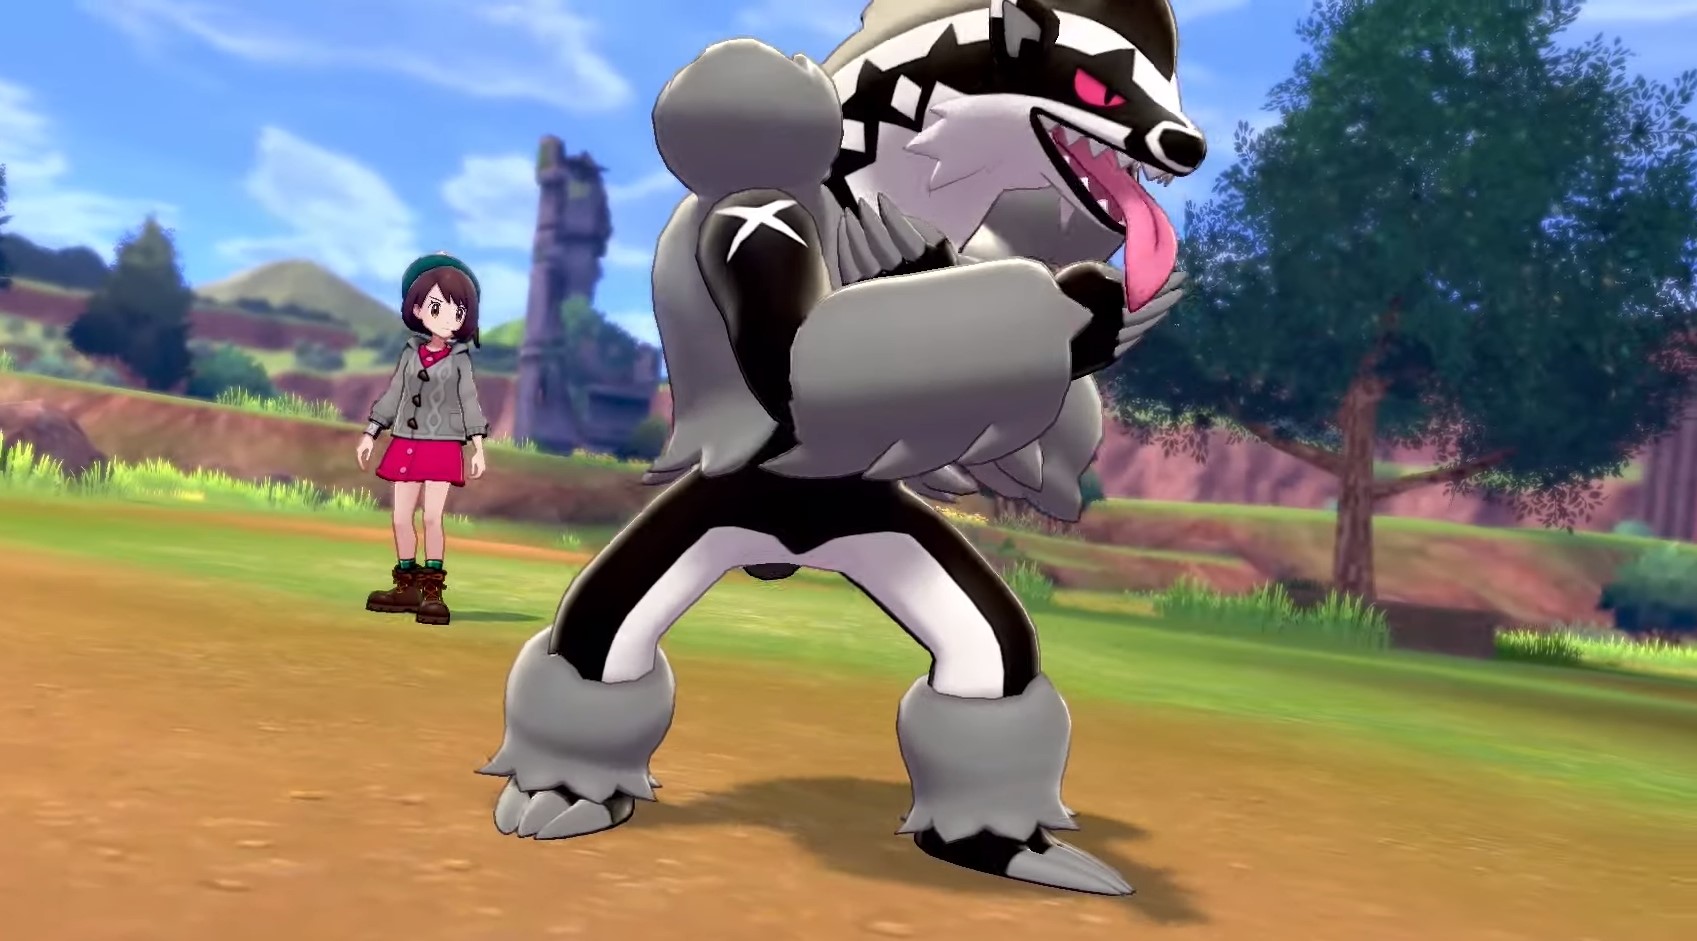 Obstagoon and Galarian trainer